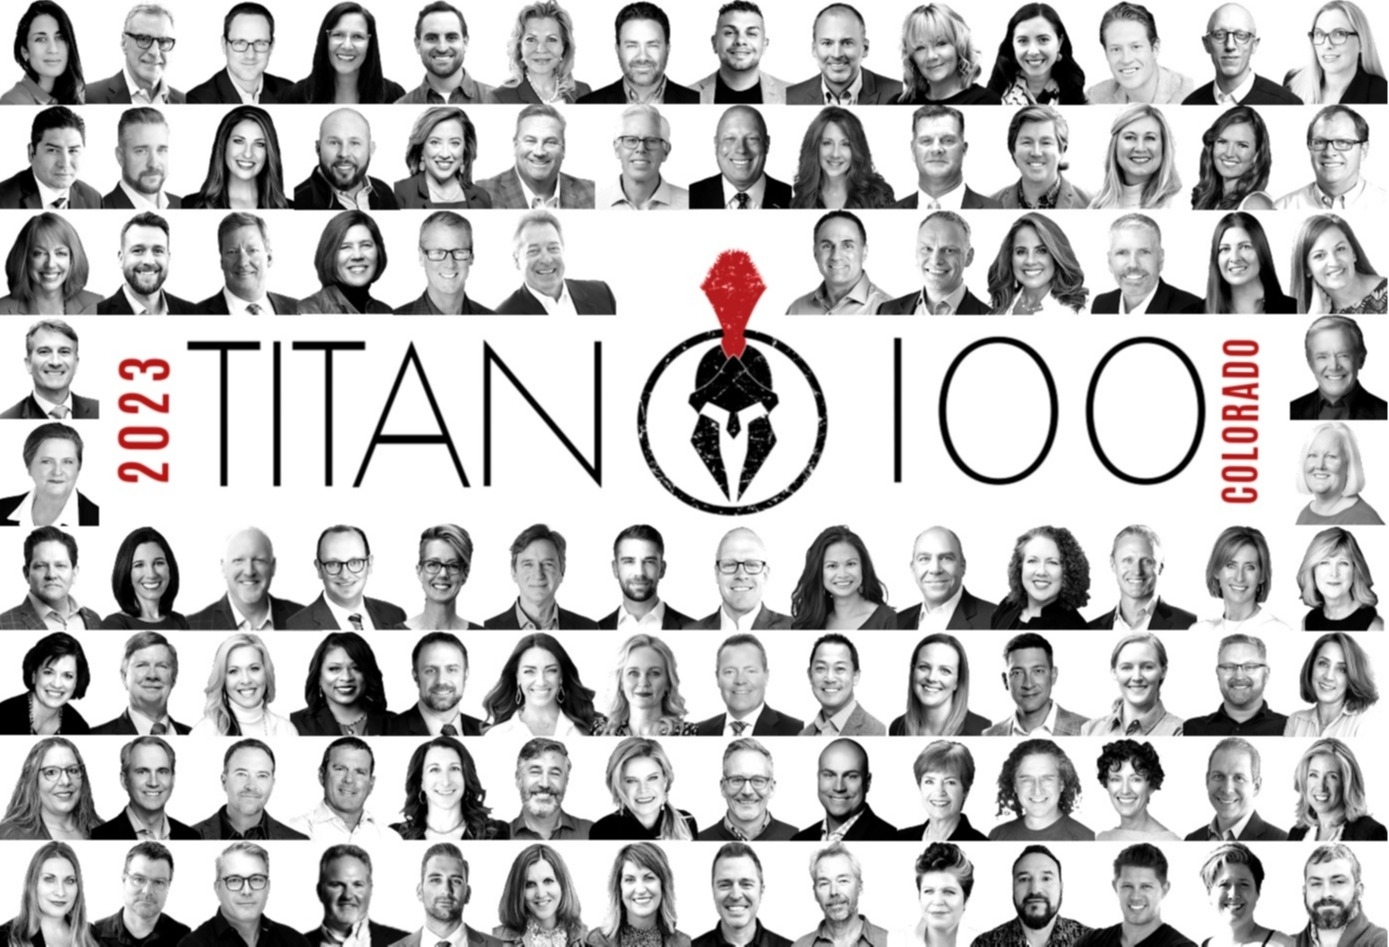 
Ceyl Prinster, CEF's President and CEO Selected as Titan 100